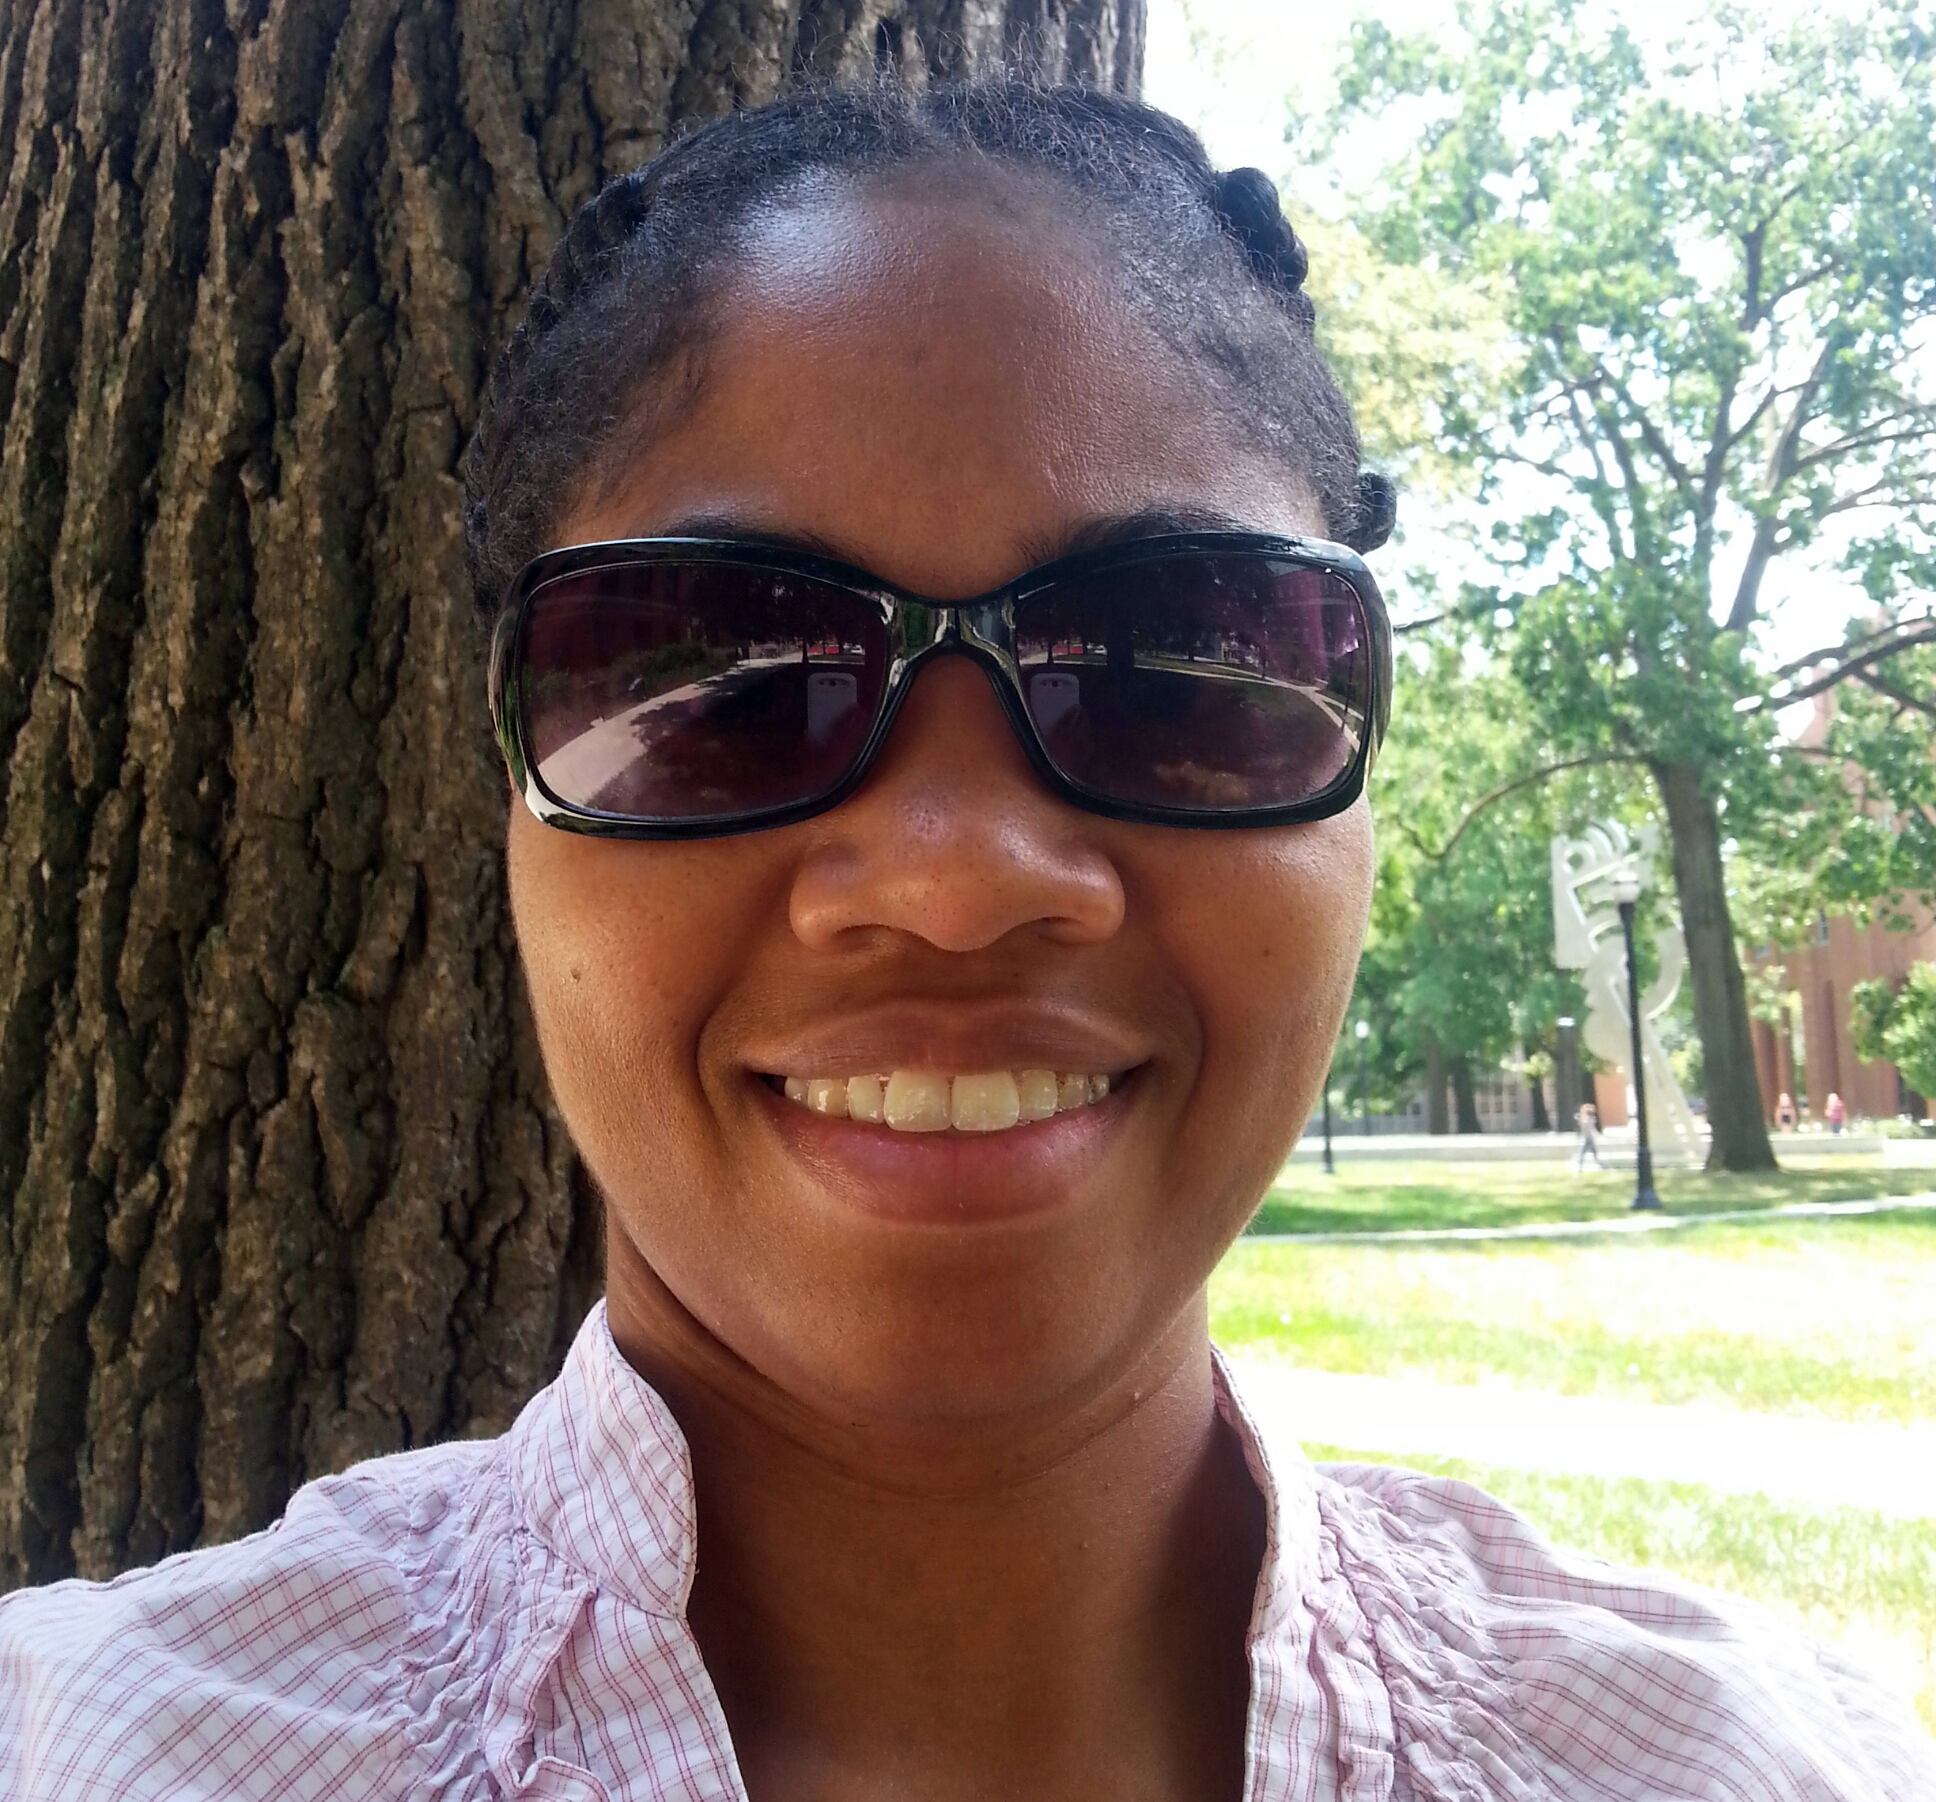 A black woman in sunglasses wears a lavender collared shirt while sitting outside by a tree